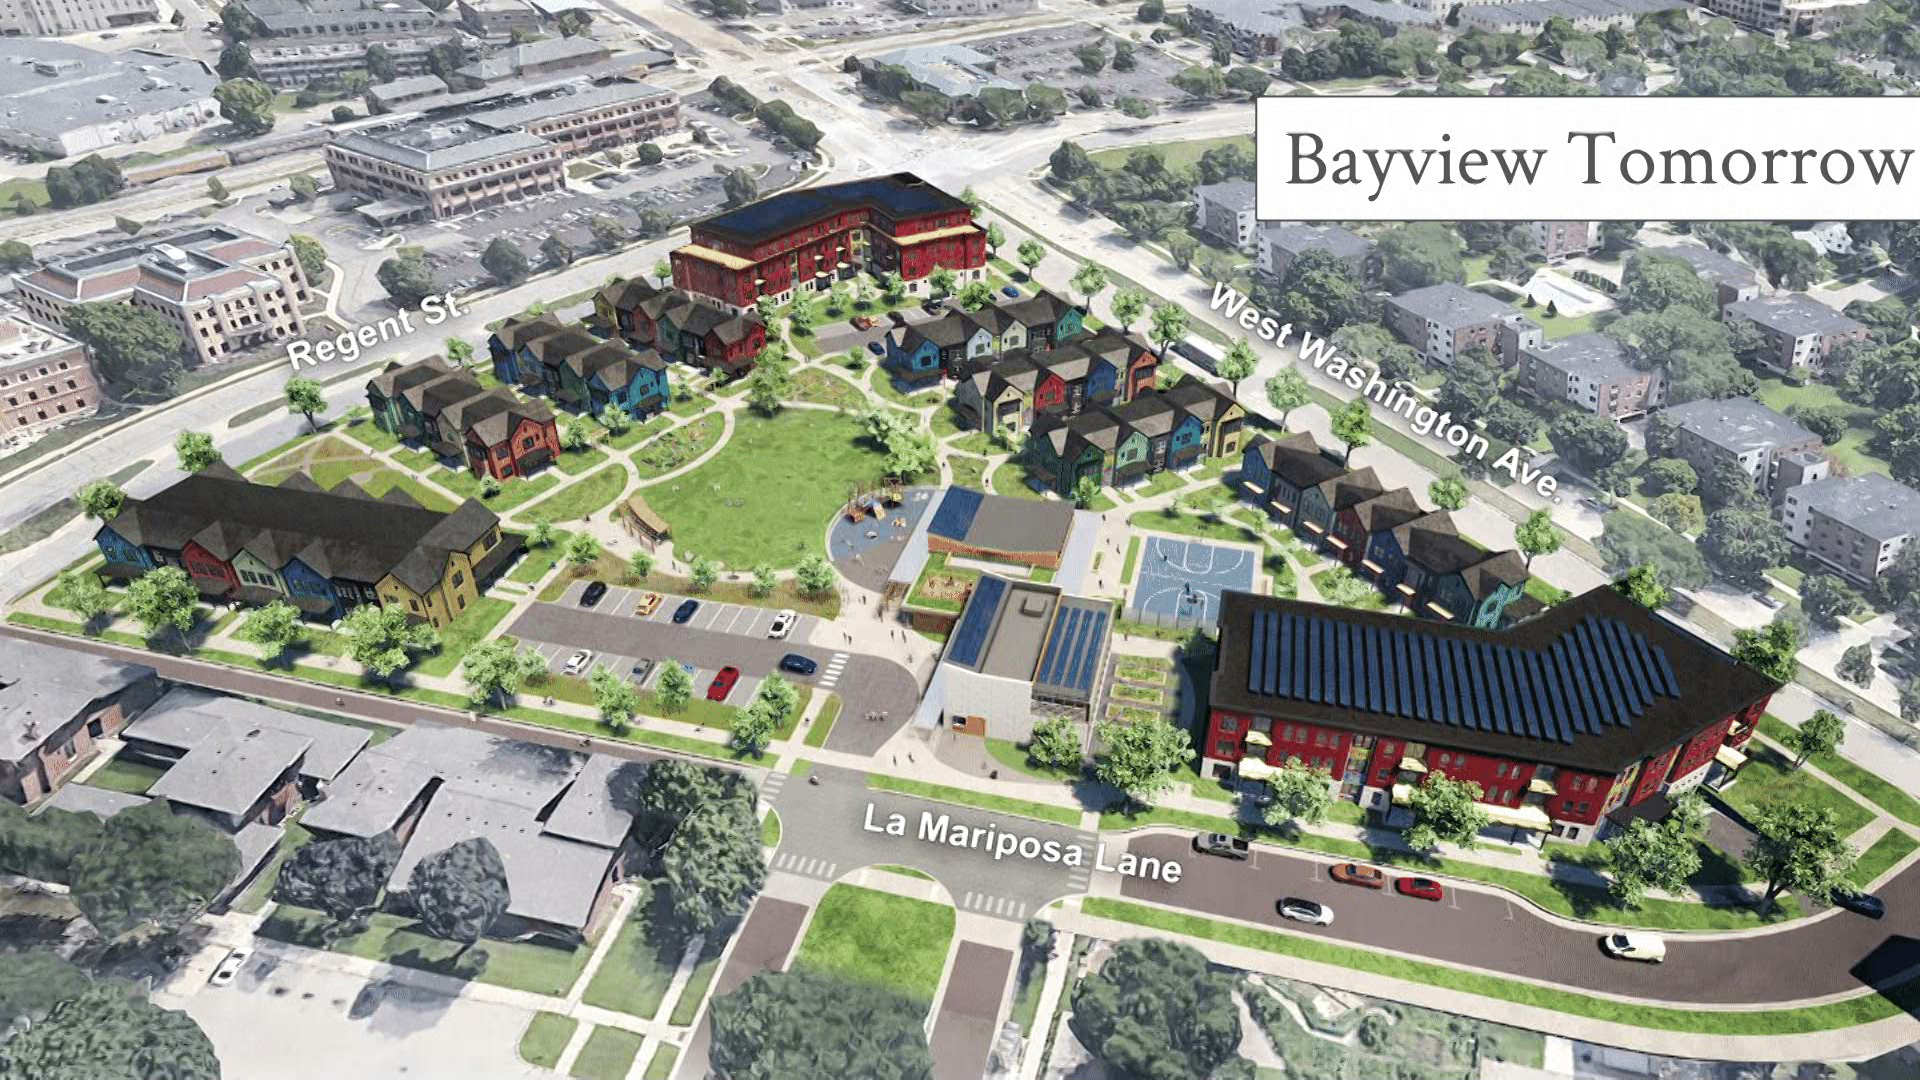 An illustration shows an aerial artistic rendering of the Bayview redevelopment project, with a label reading "Bayview Tomorrow."